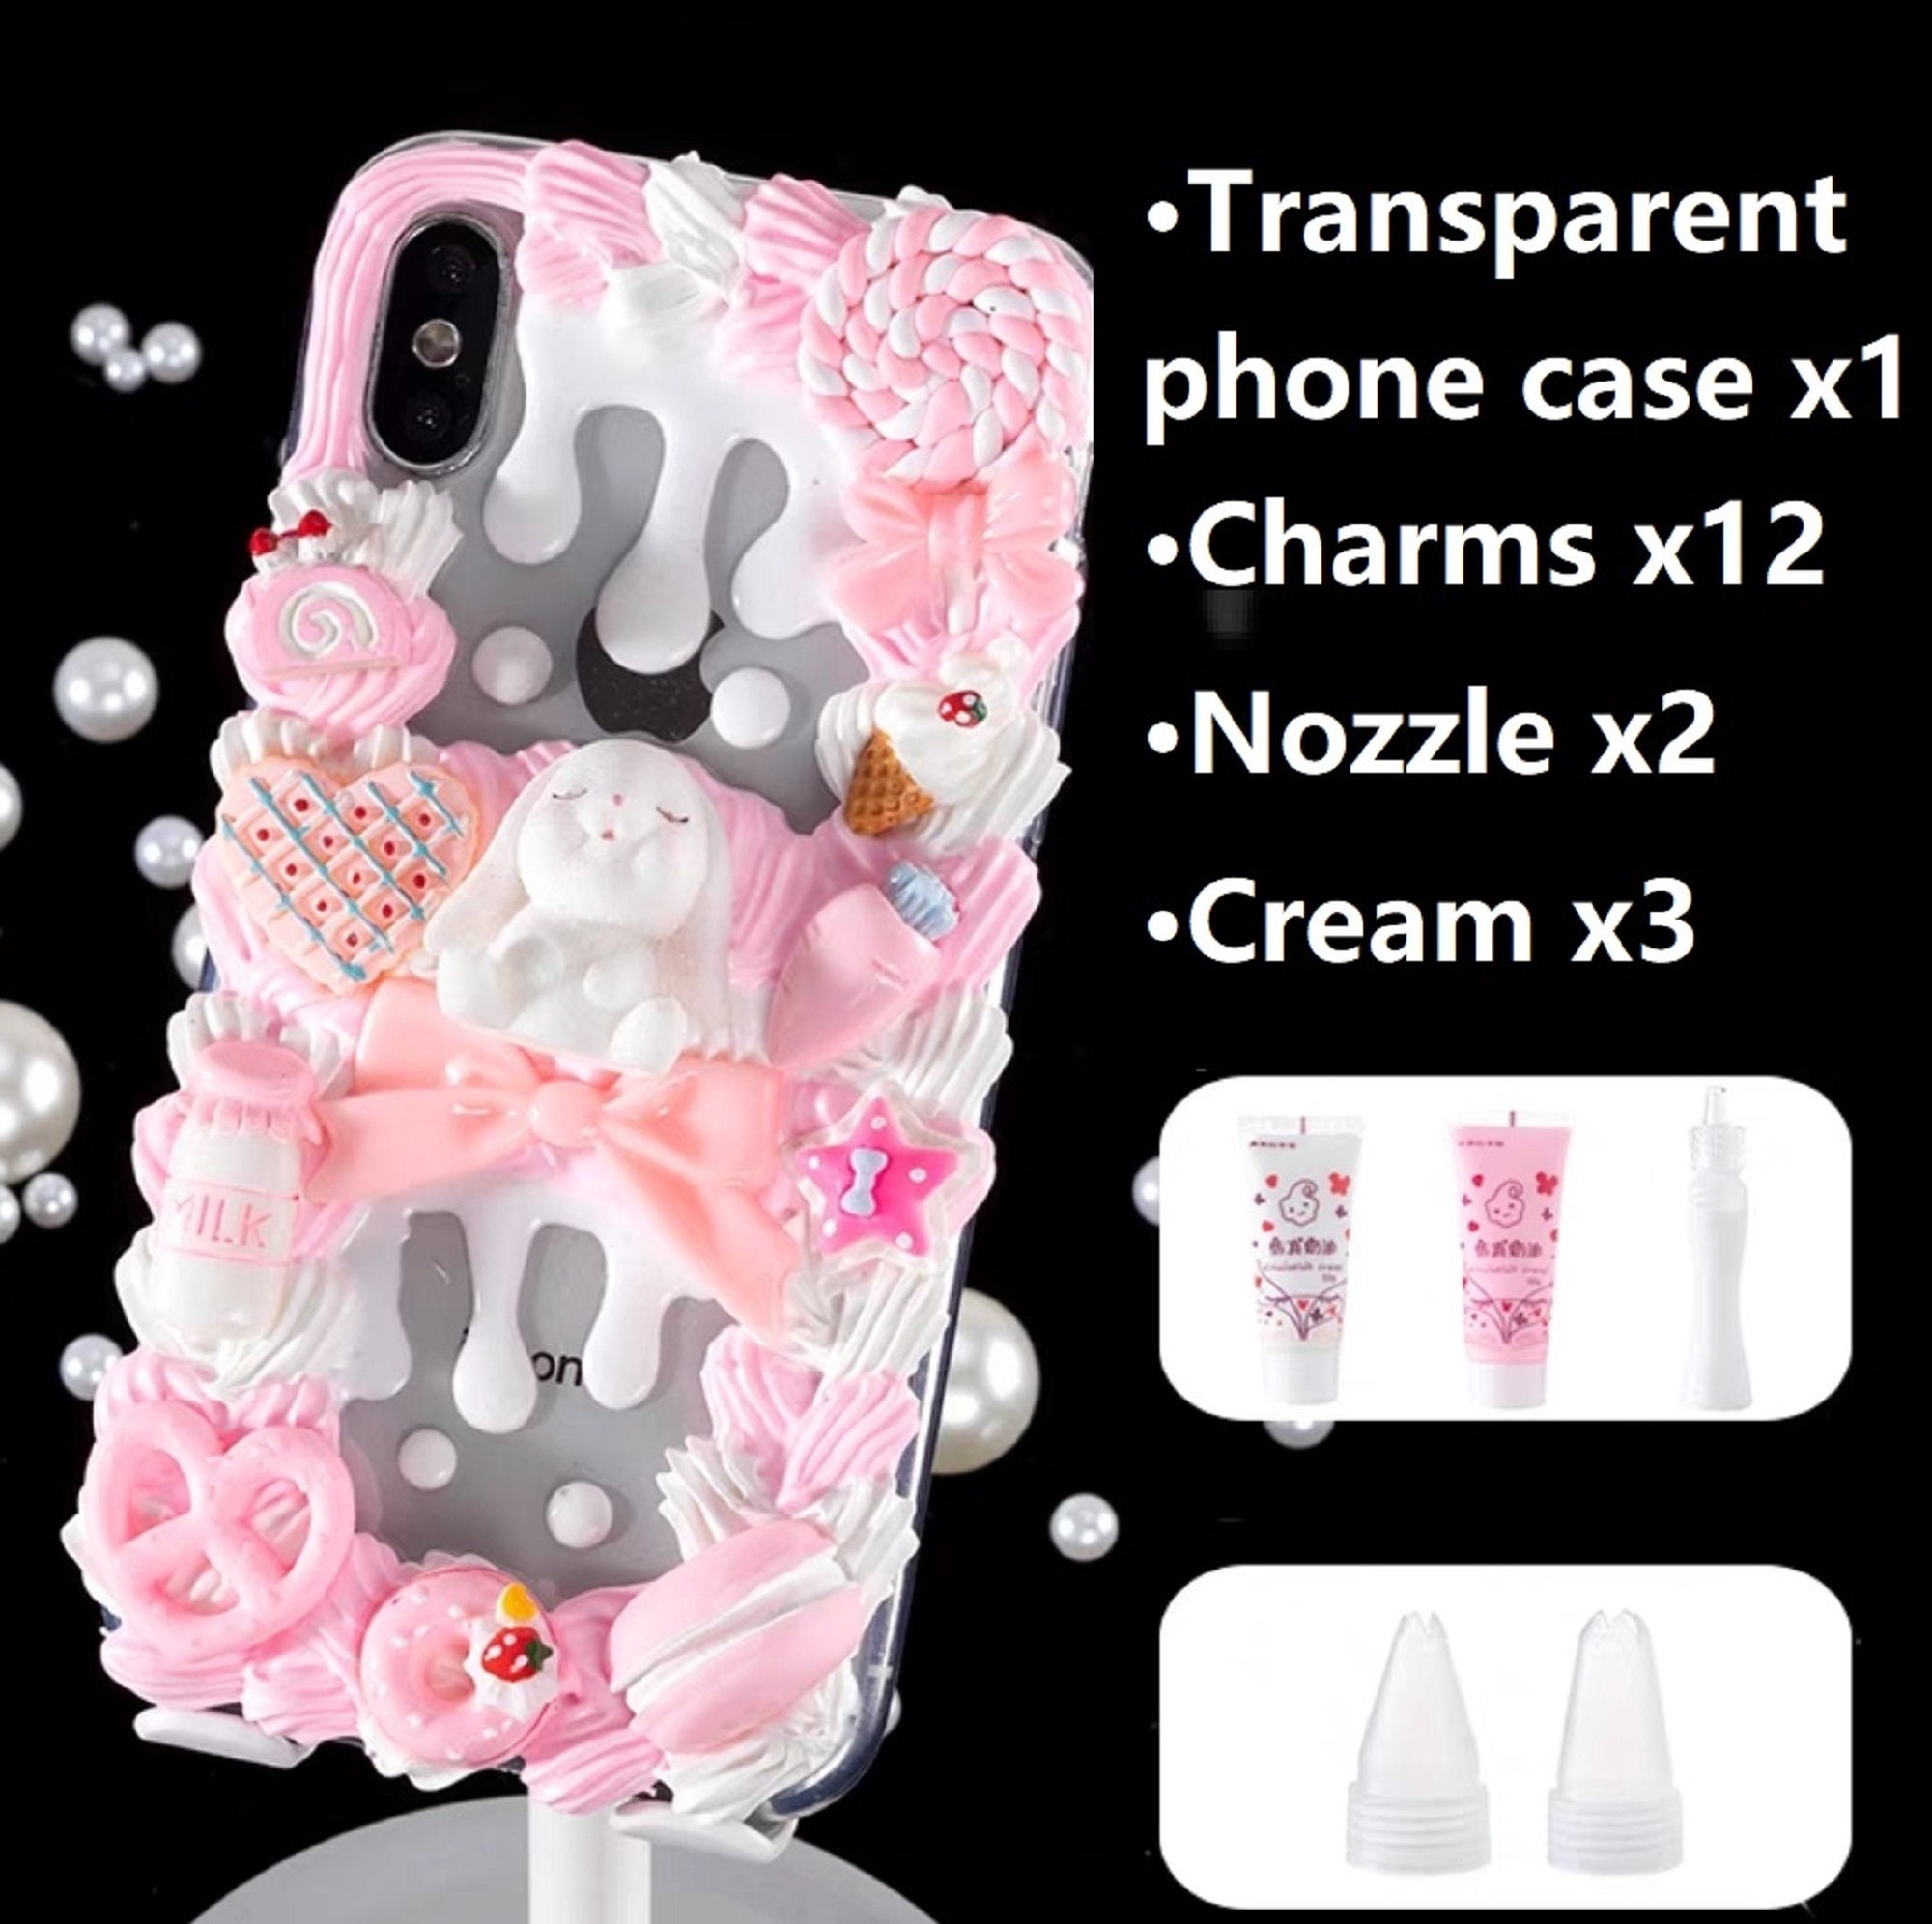 Decoden Phone Case DIY Kit Iridescent Flowers Bows Stringed Pearls